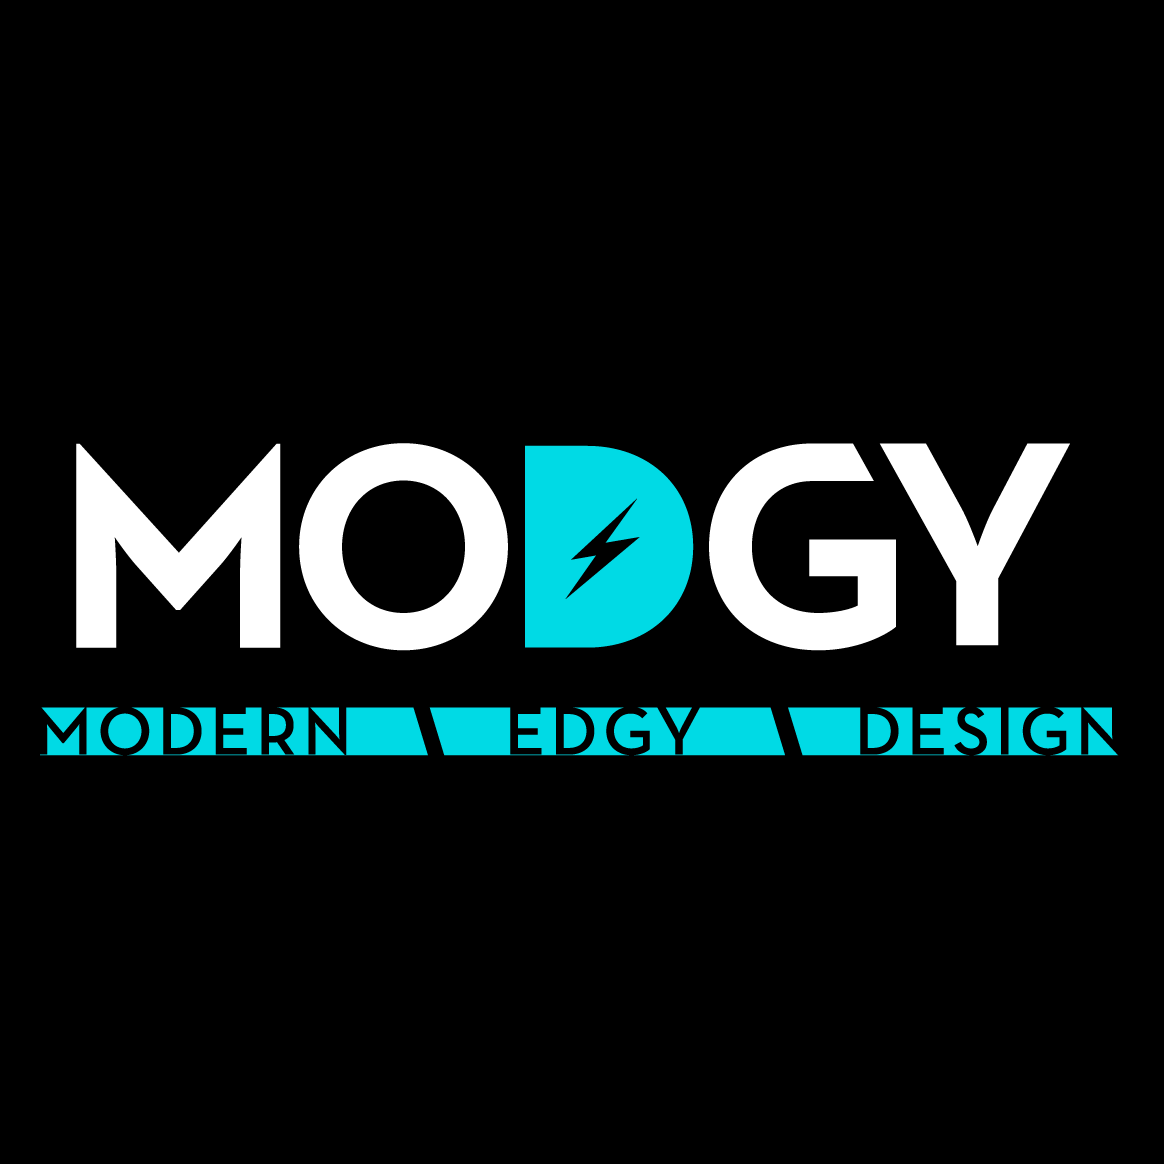 Modgy is Modern + Edgy Design